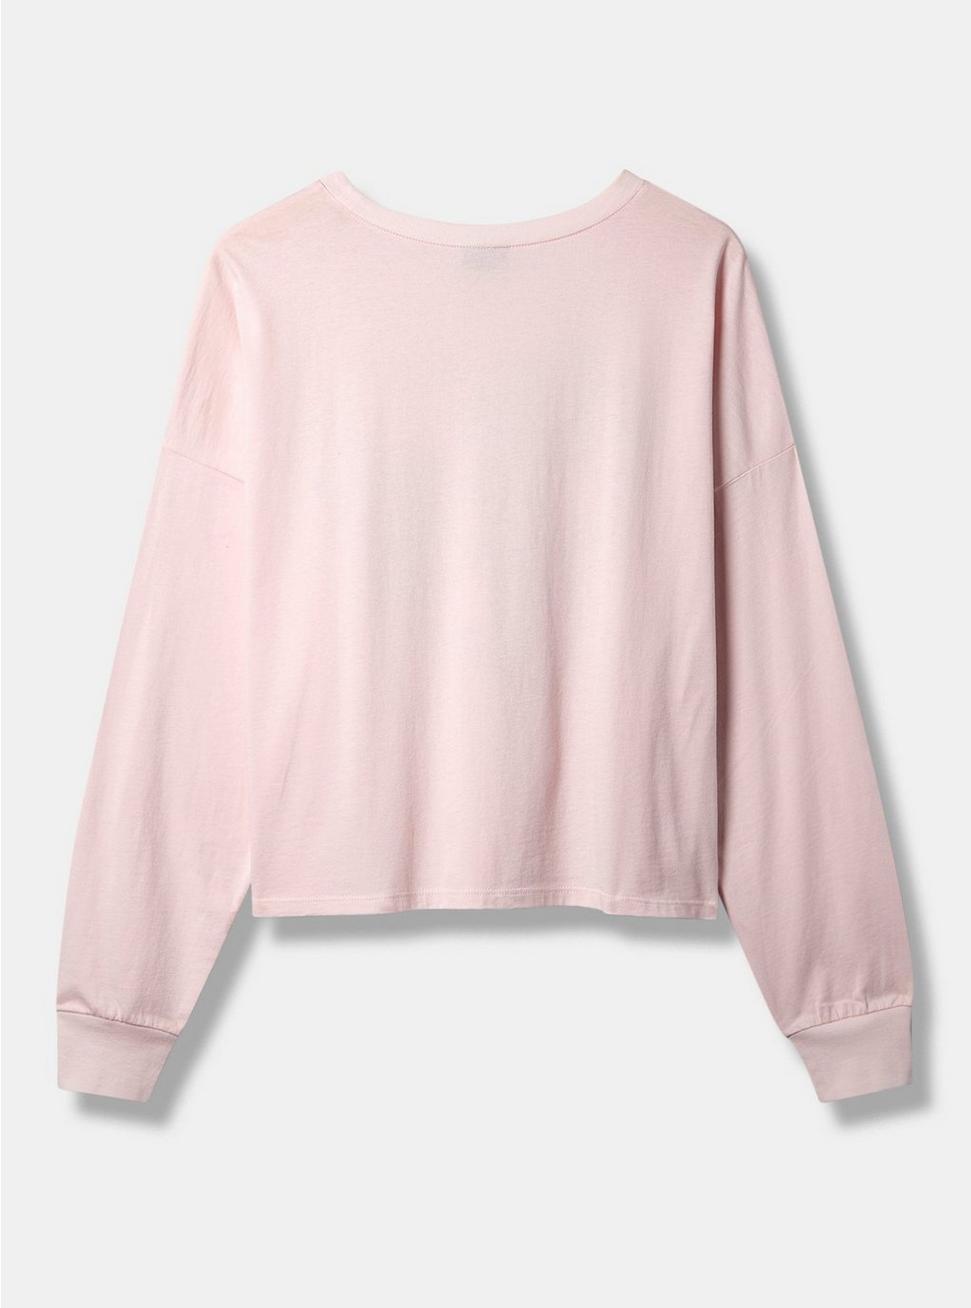 Heart Relaxed Fit Cotton Jersey Crew Neck Long Sleeve Crop Tee, PINK, alternate